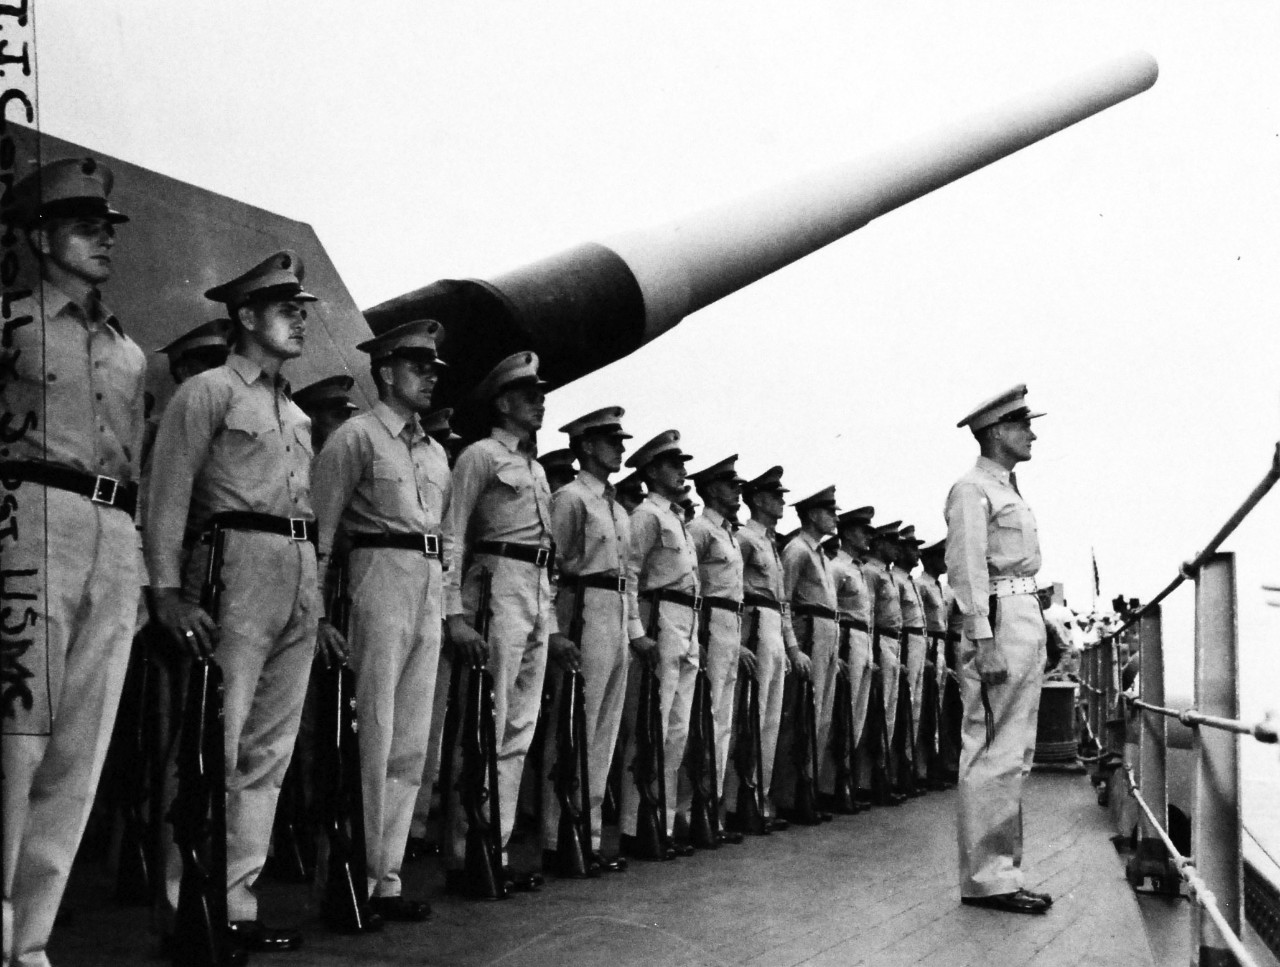 127-GW-1549-134503:  Formal Japanese Surrender, September 2, 1945.    Marine Honor Guard at the formal surrender to Allied powers onboard USS Missouri (BB 63) in Tokyo Harbor, Japan.  The Leathernecks are shown here standing at stiff attention on the quarterdeck beneath the long barrels of the 16” guns as representatives of the various governments come onboard for the ceremonies.   Photographed by Connolly.  Official U.S. Marine Corps Photograph, now in the collections of the National Archives.  (2016/05/03).  